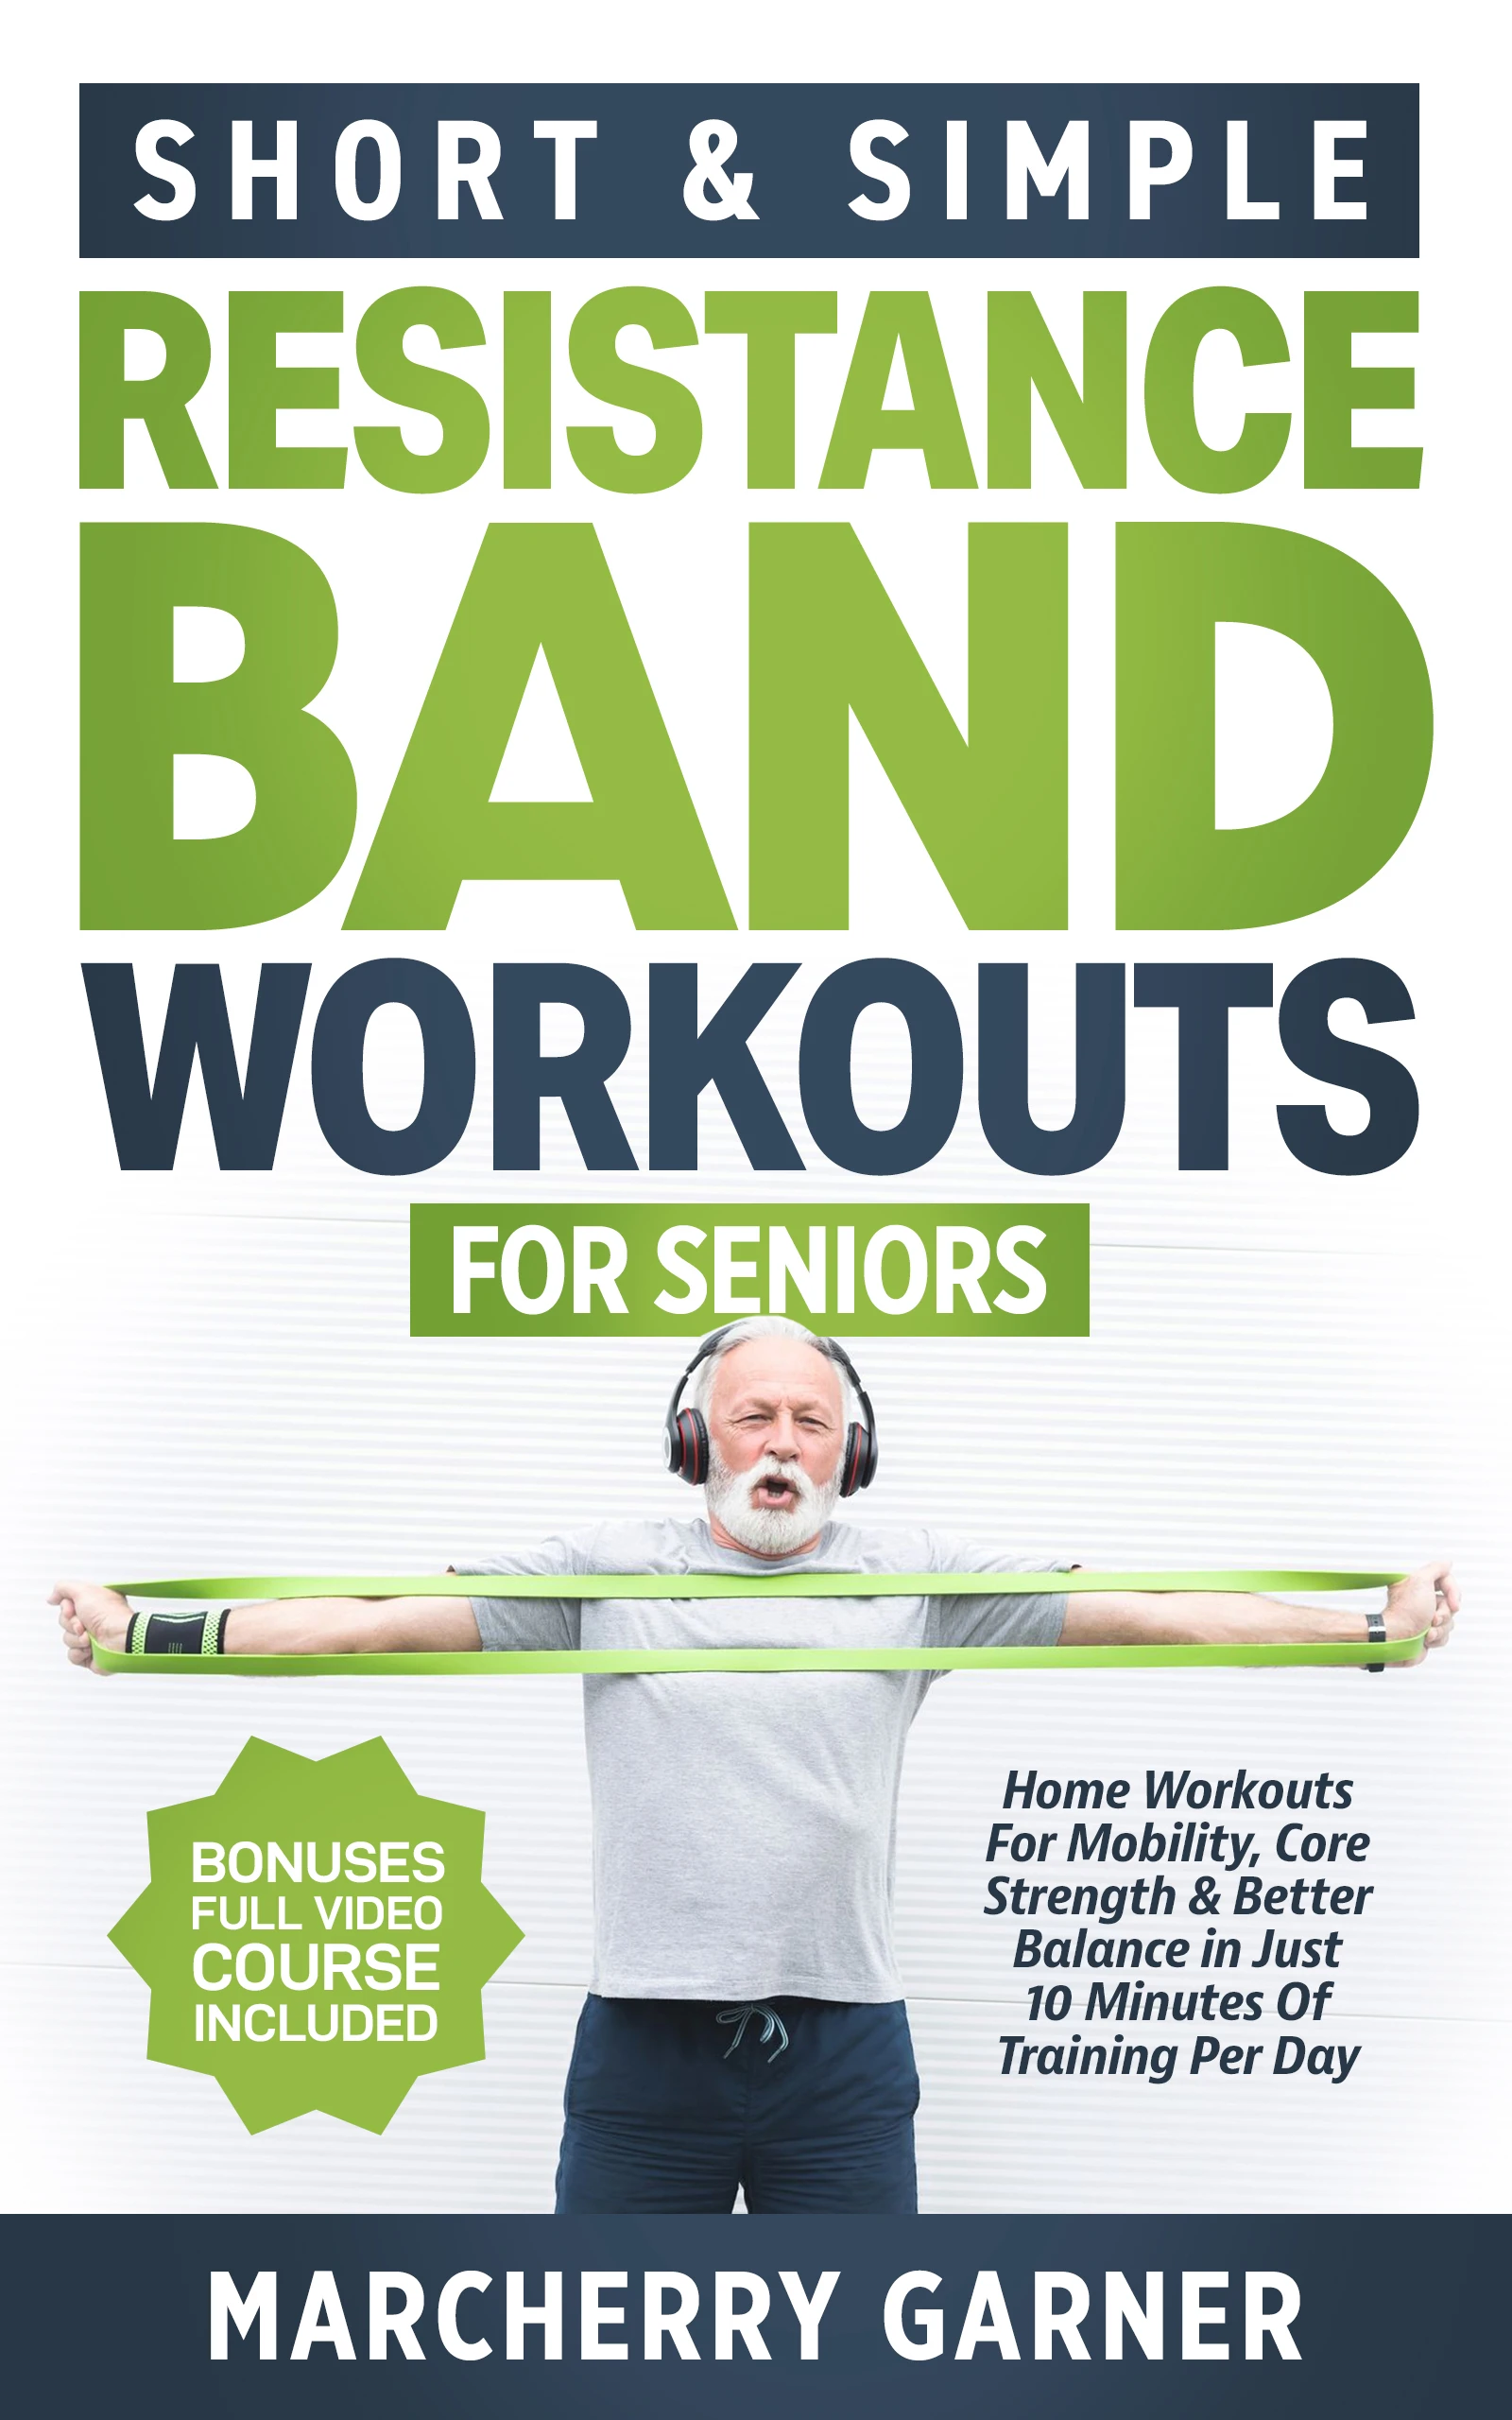 Short & Simple Resistance Band Workouts for Seniors: Home Workouts For Mobility, Core Strength & Better Balance in Just 10 Minutes Of Training Per Day